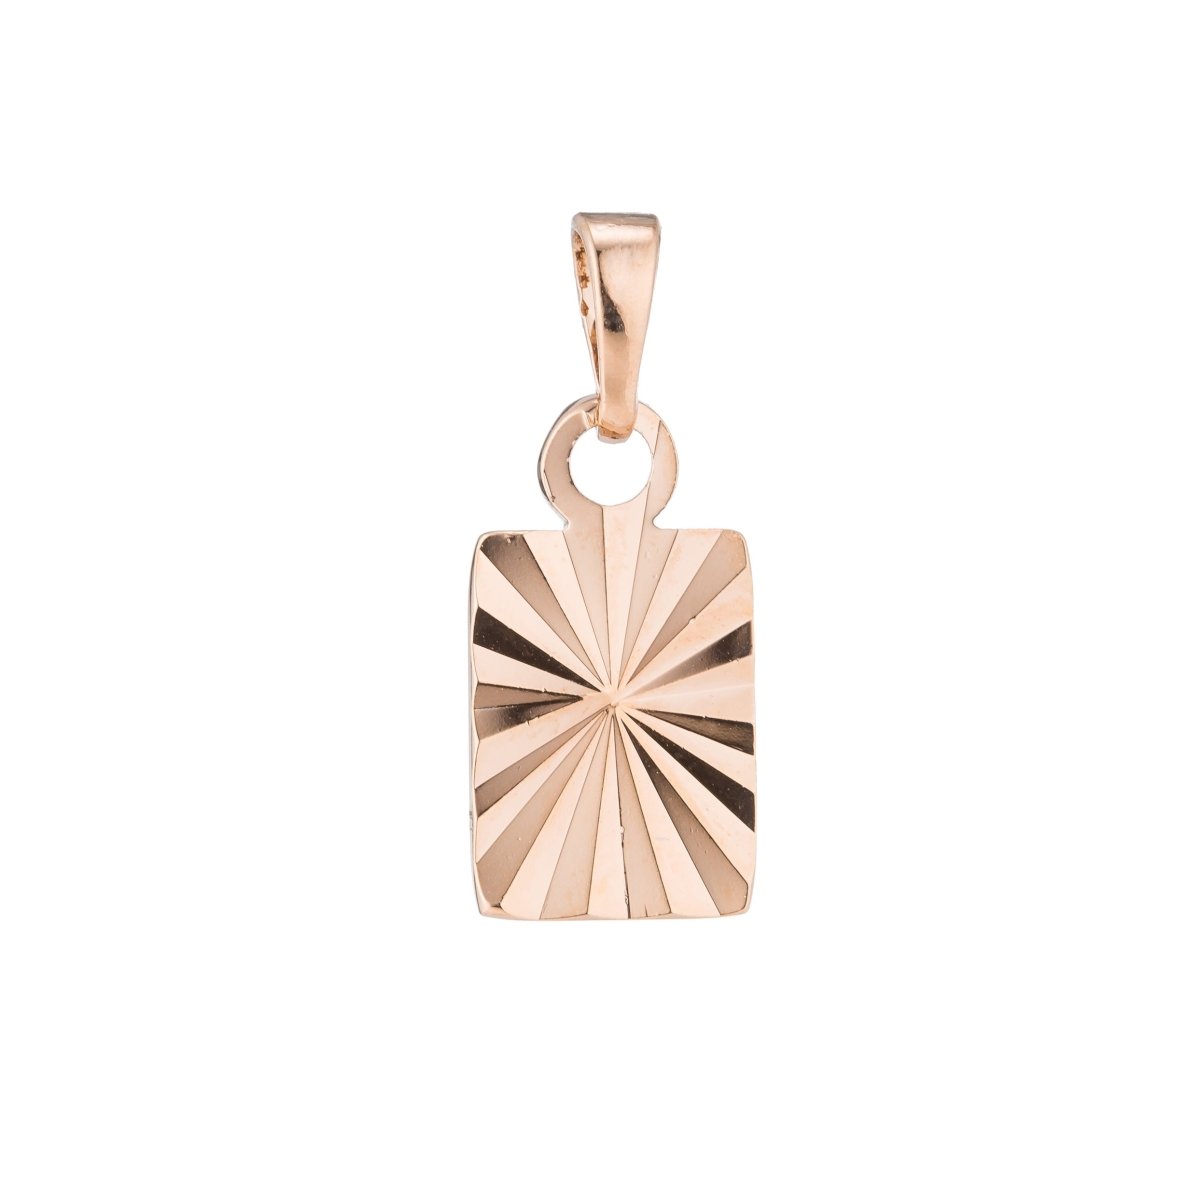 Rose Gold Square Geometric, Plate, Shine, Bright, Symbol, Women, Ladies, Gift, Mom, Necklace Pendant Charm Bead Bails Findings for Jewelry Making H-509 - DLUXCA